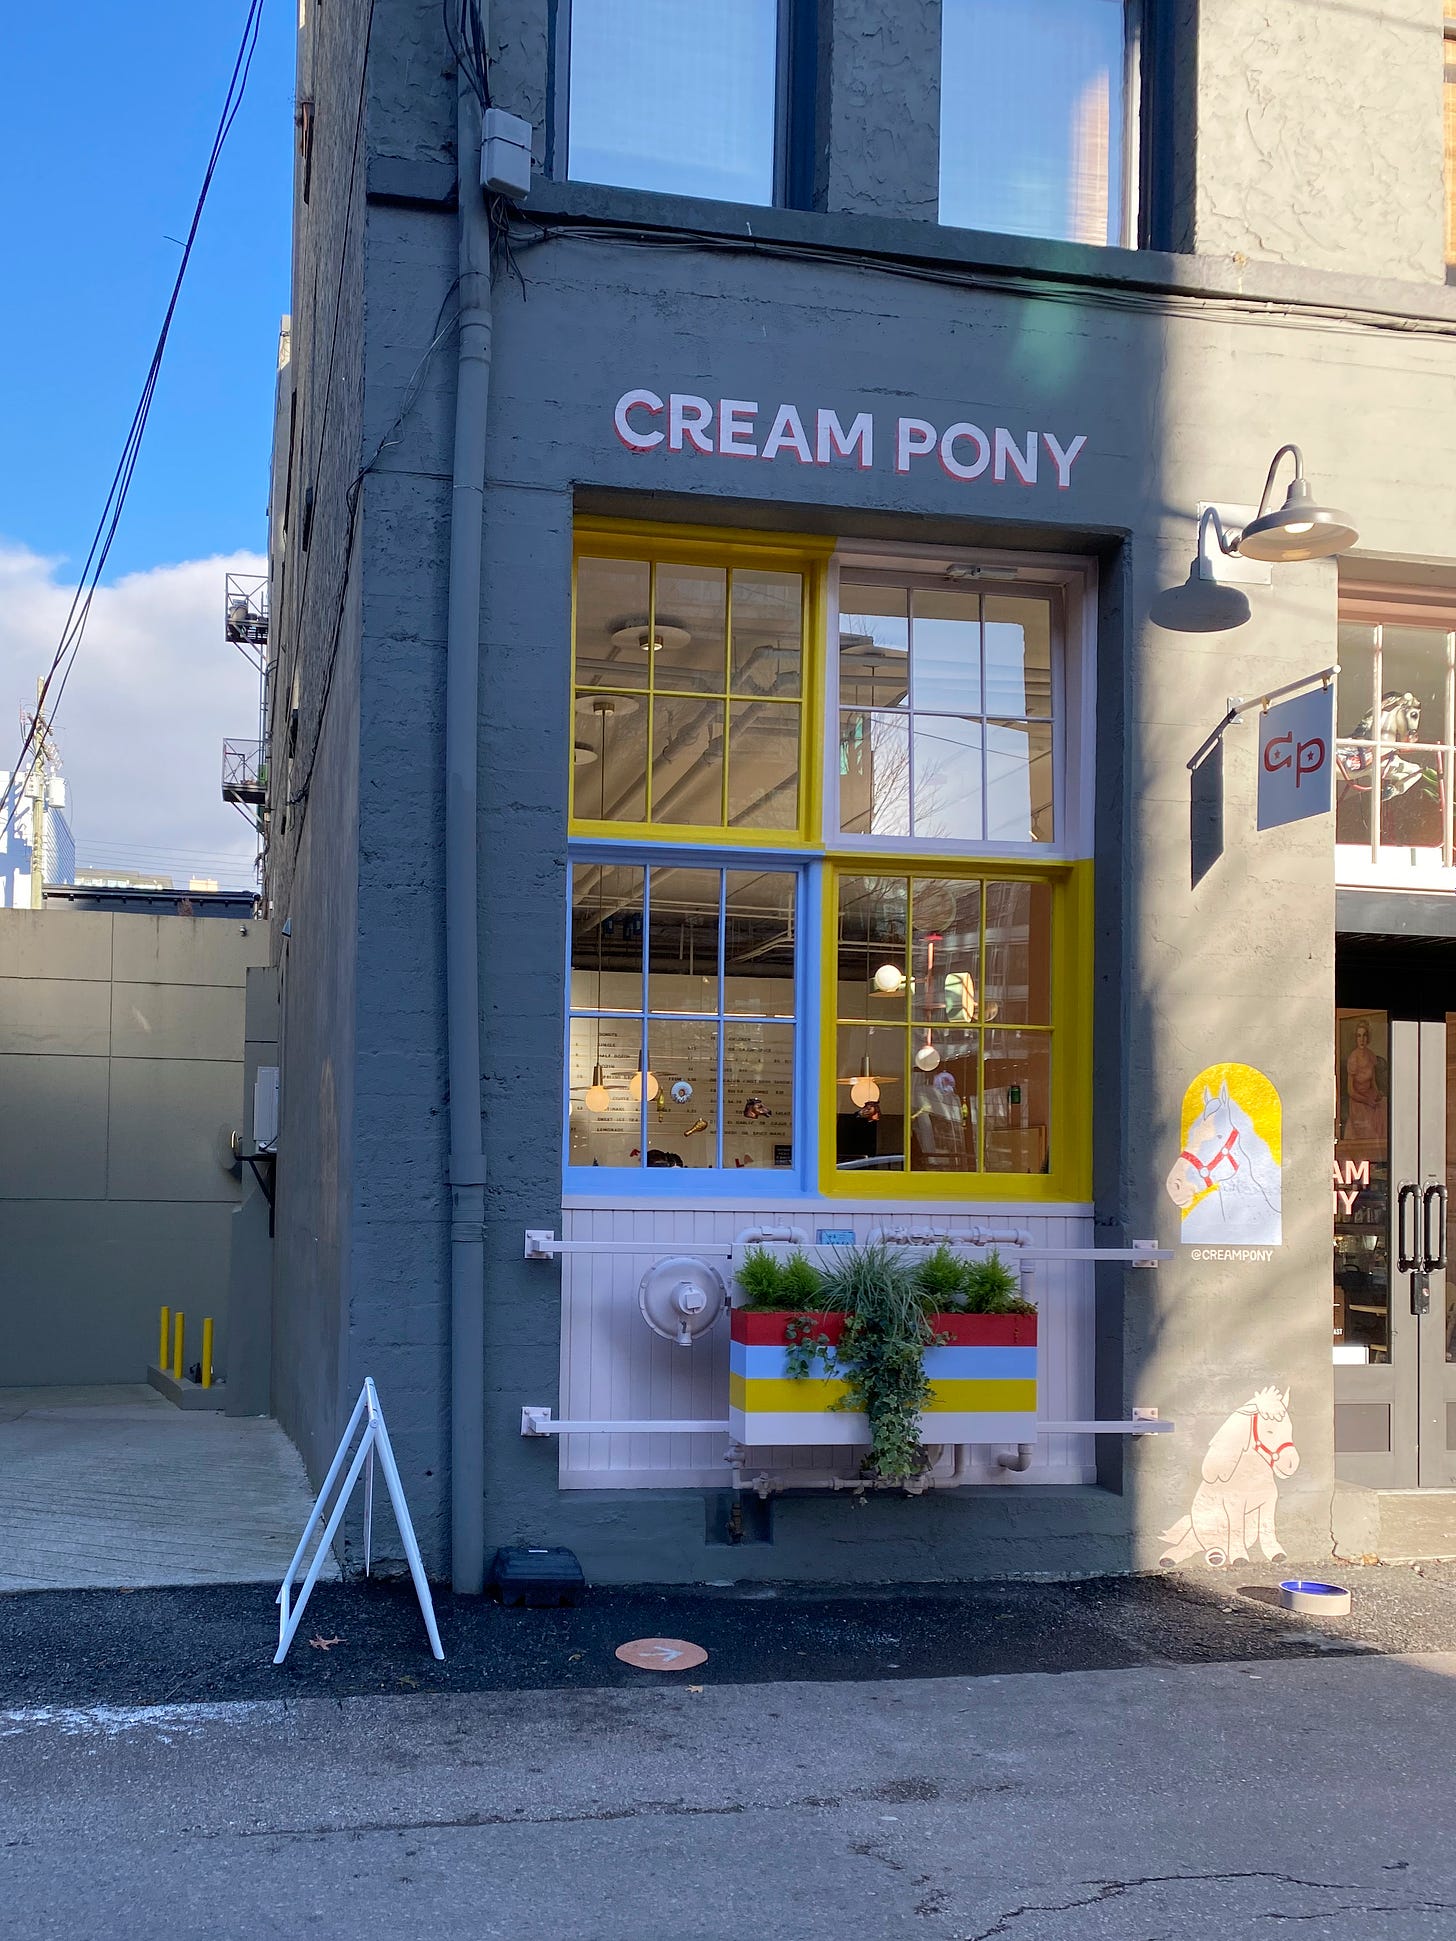 A grey building with the words 'Cream Pony' in pink and red block letters. Below the words are four panels of windows, their frames painted yellow, blue, and pink. A striped planter box is below them with plants trailing out of it. Next to the window are two paintings of horses, below a sign labelled 'CP'. Behind the building, a fluffy white cloud sits low on the horizon, and the sky is blue.